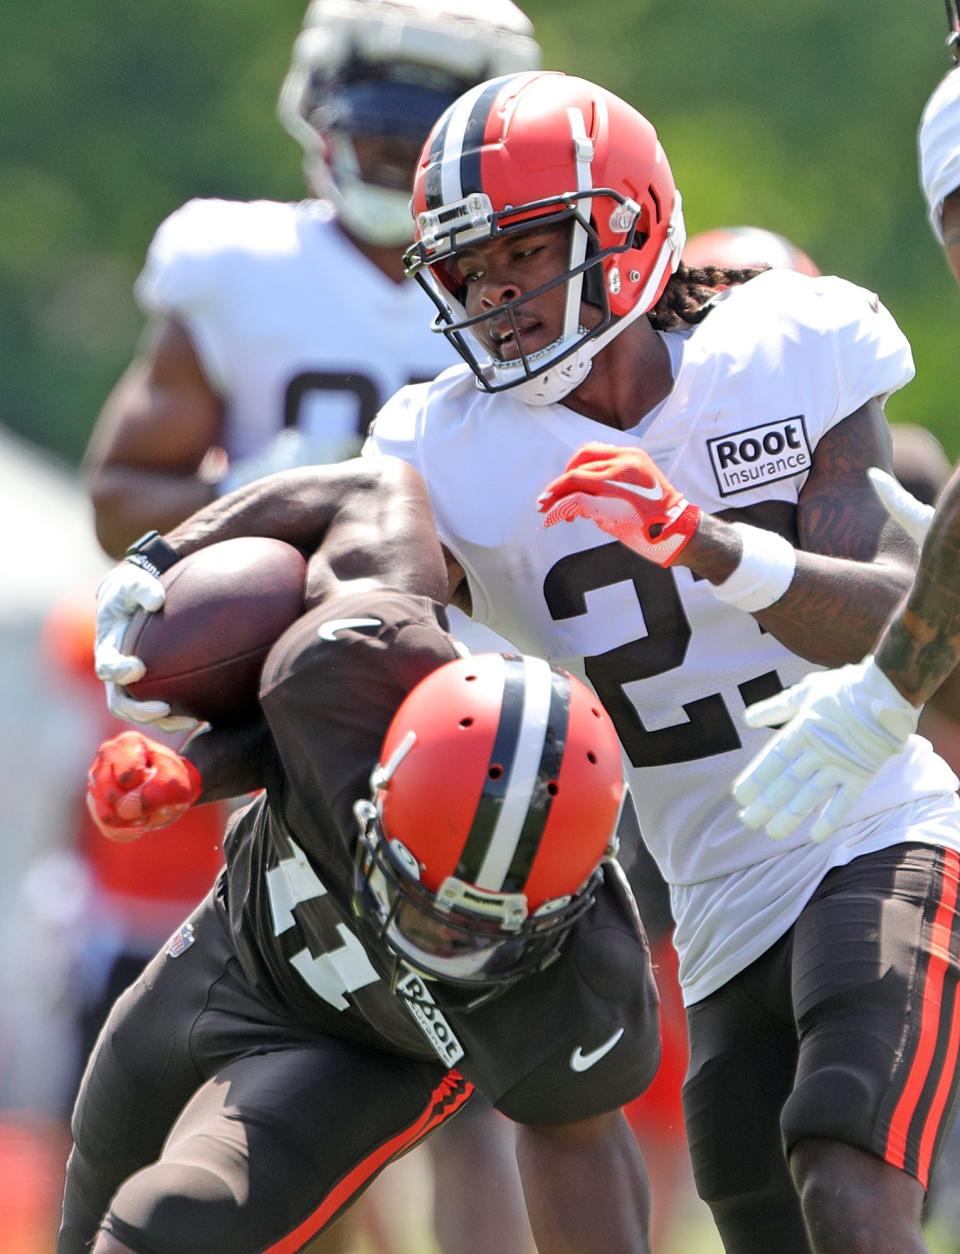 Cleveland Browns cornerback Martin Emerson Jr. punches the ball away from wide receiver Donovan Peoples-Jones during the NFL football team's football training camp in Berea on Tuesday.